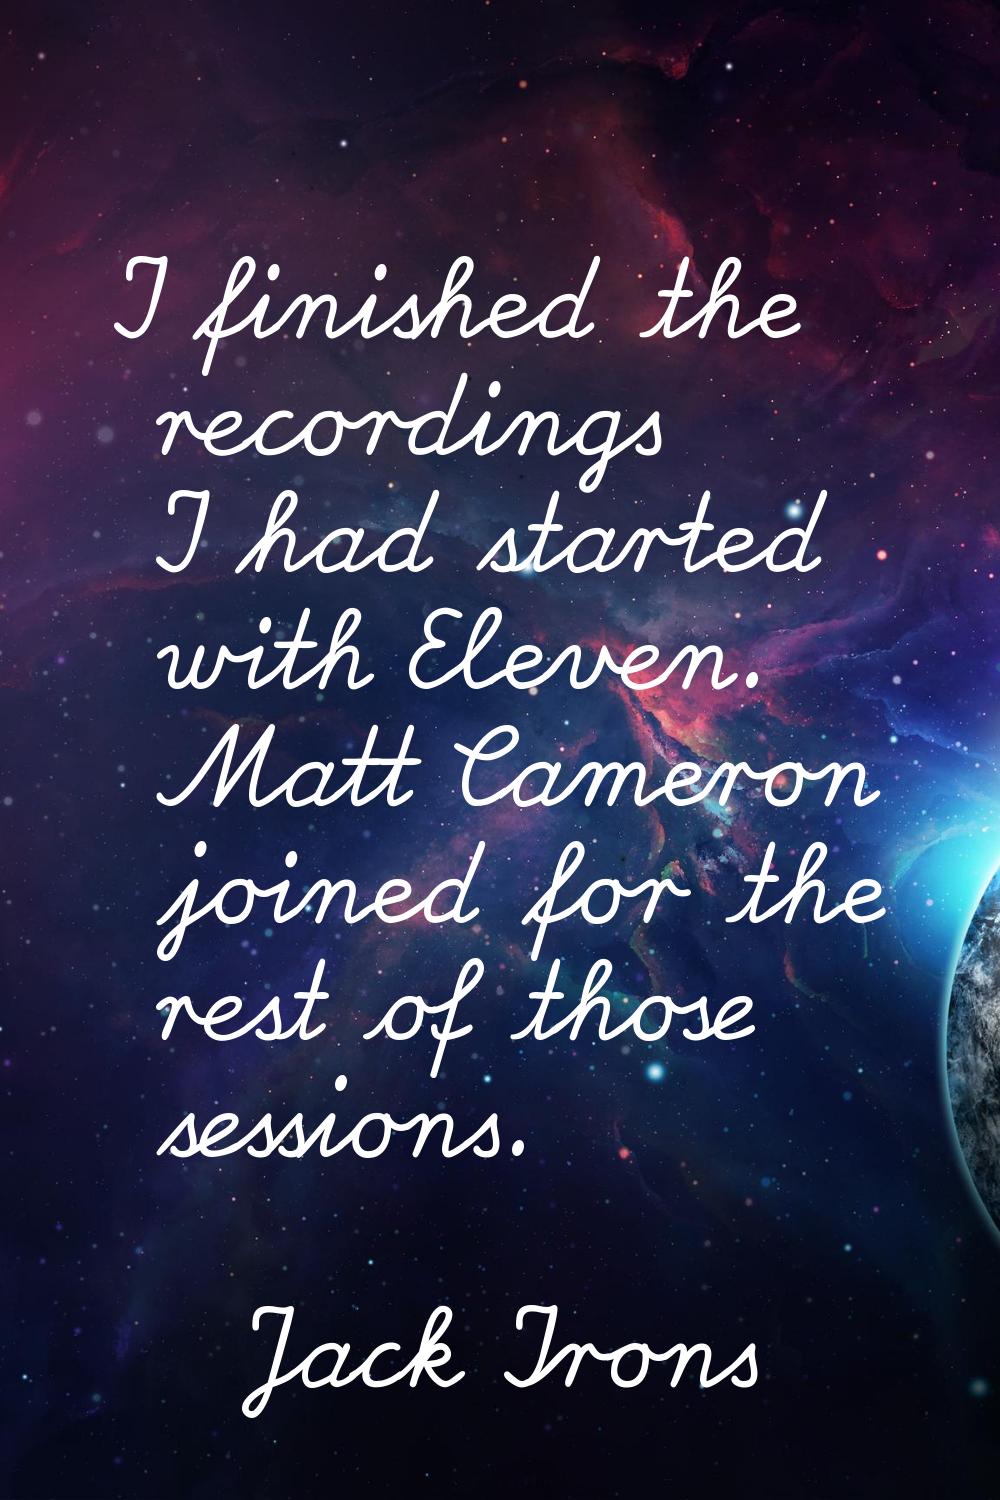 I finished the recordings I had started with Eleven. Matt Cameron joined for the rest of those sess